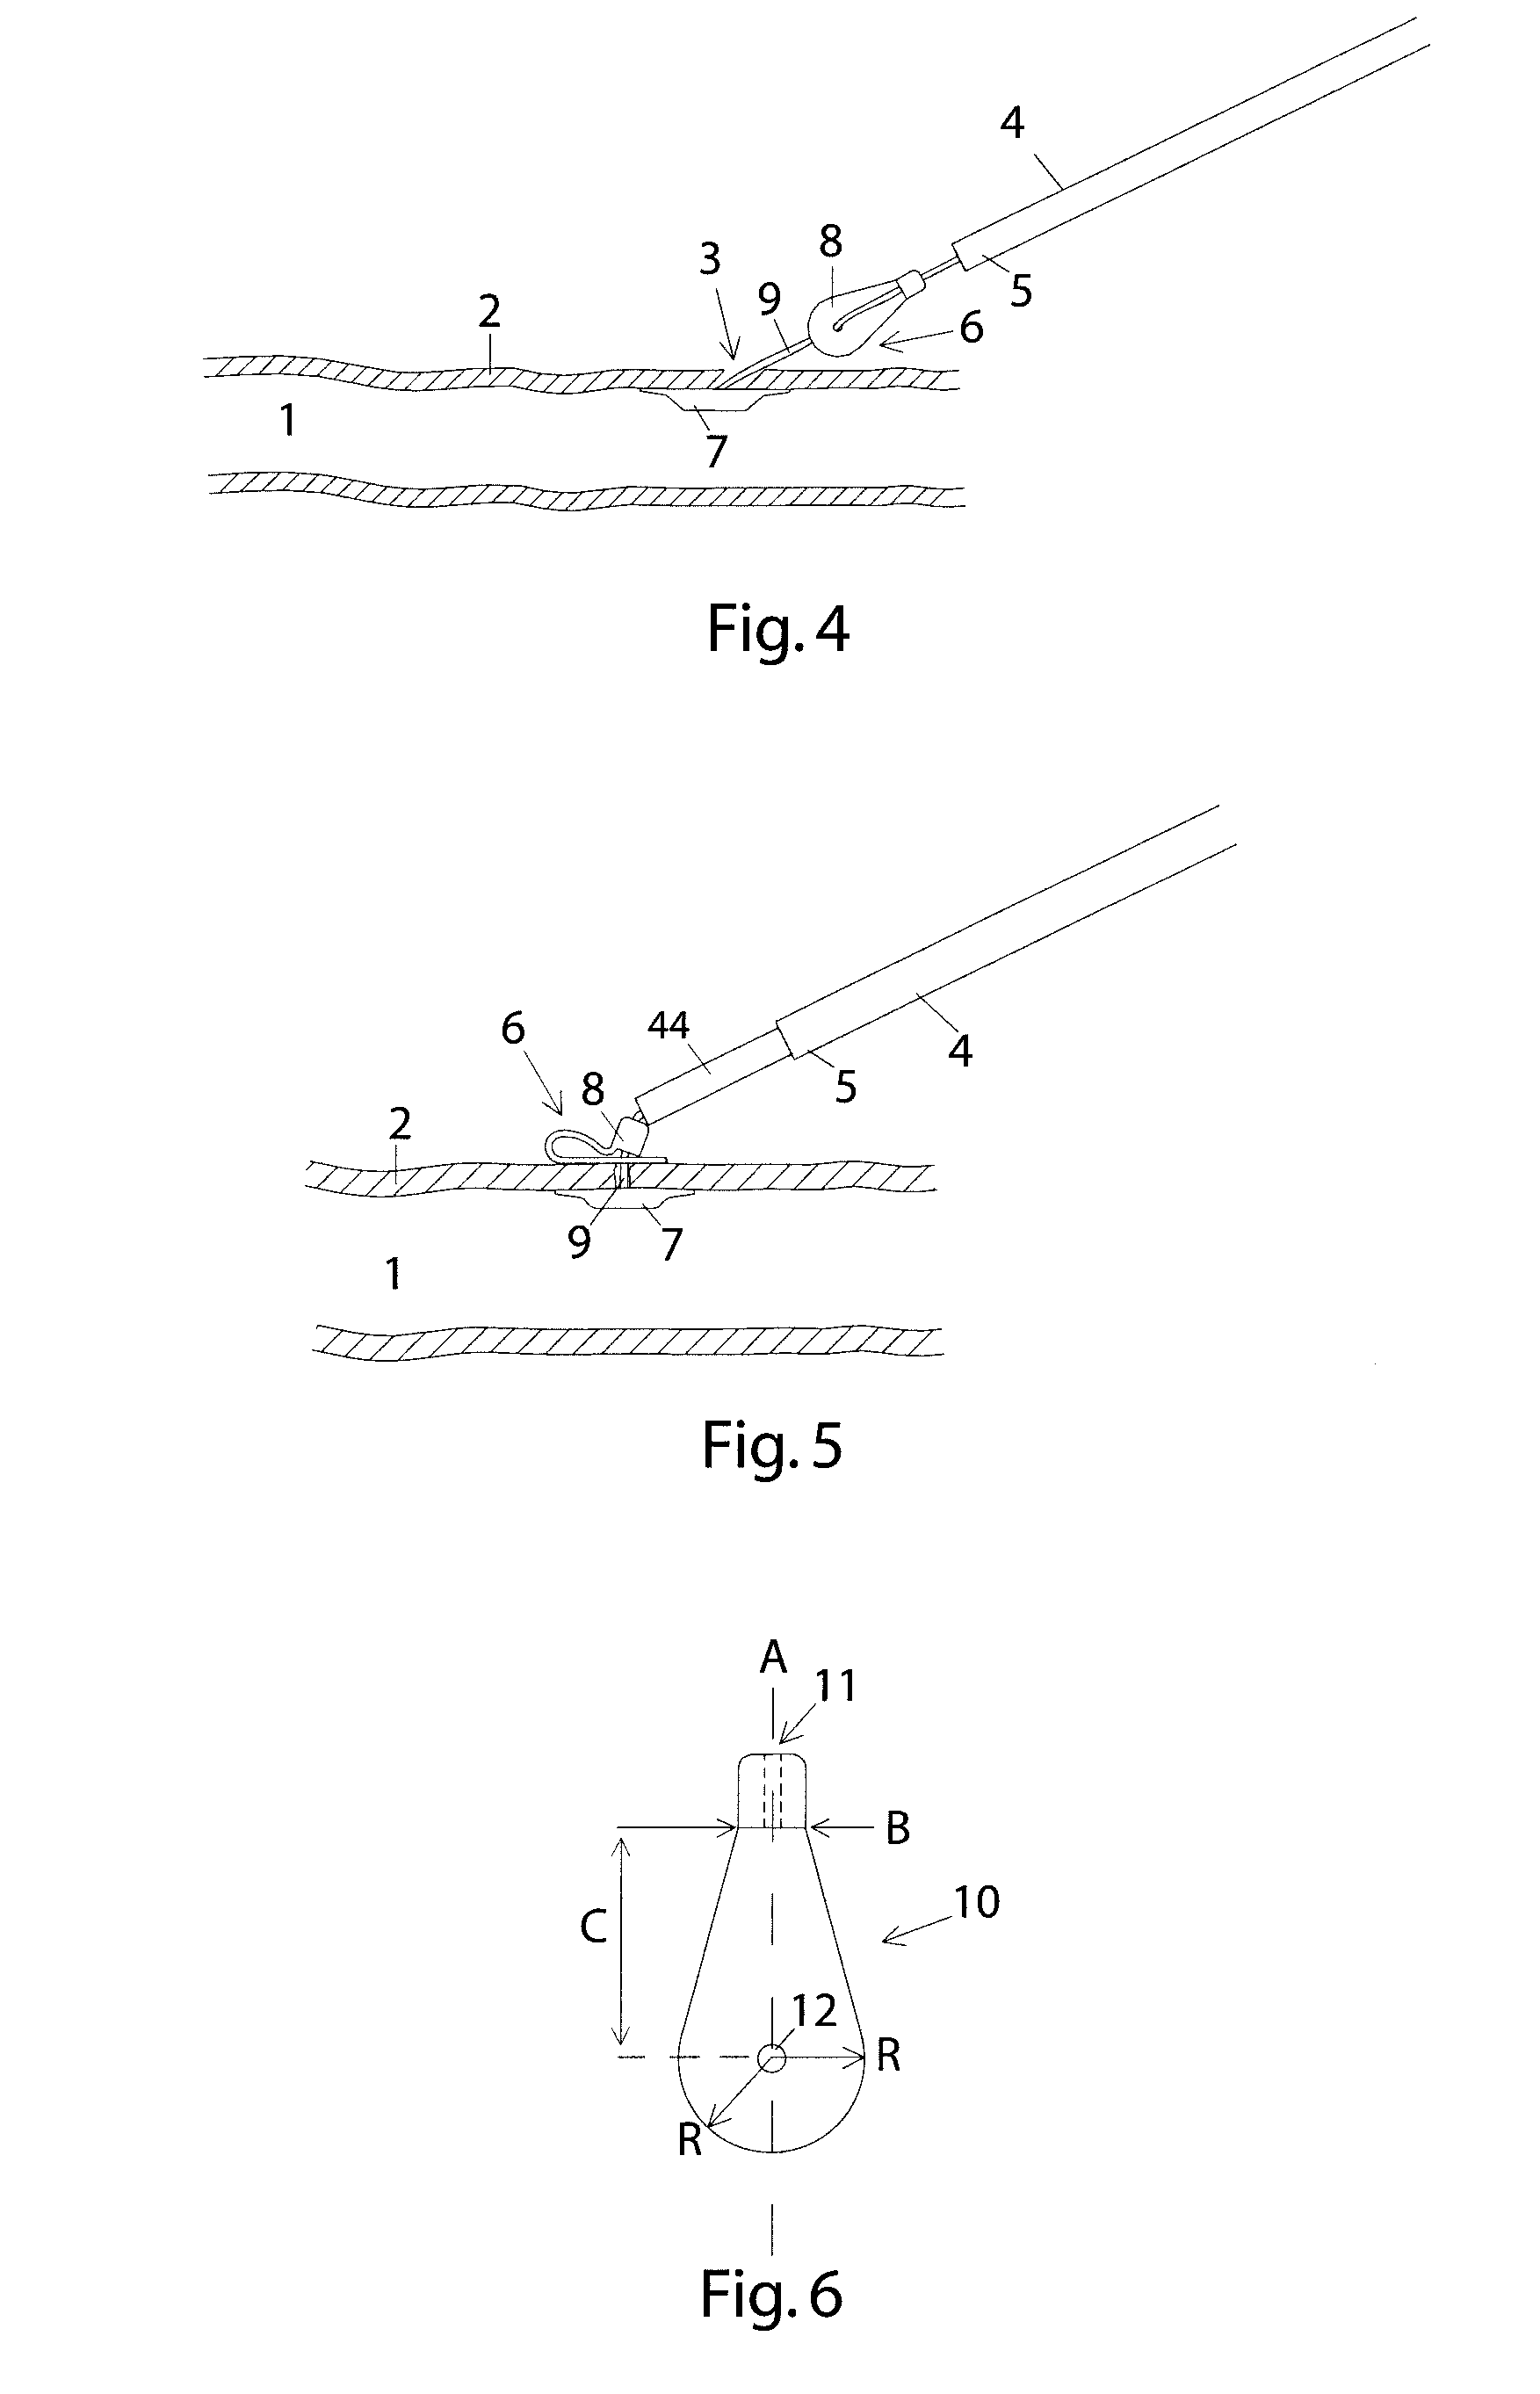 Method and device for sealing a puncture hole in a bodily organ